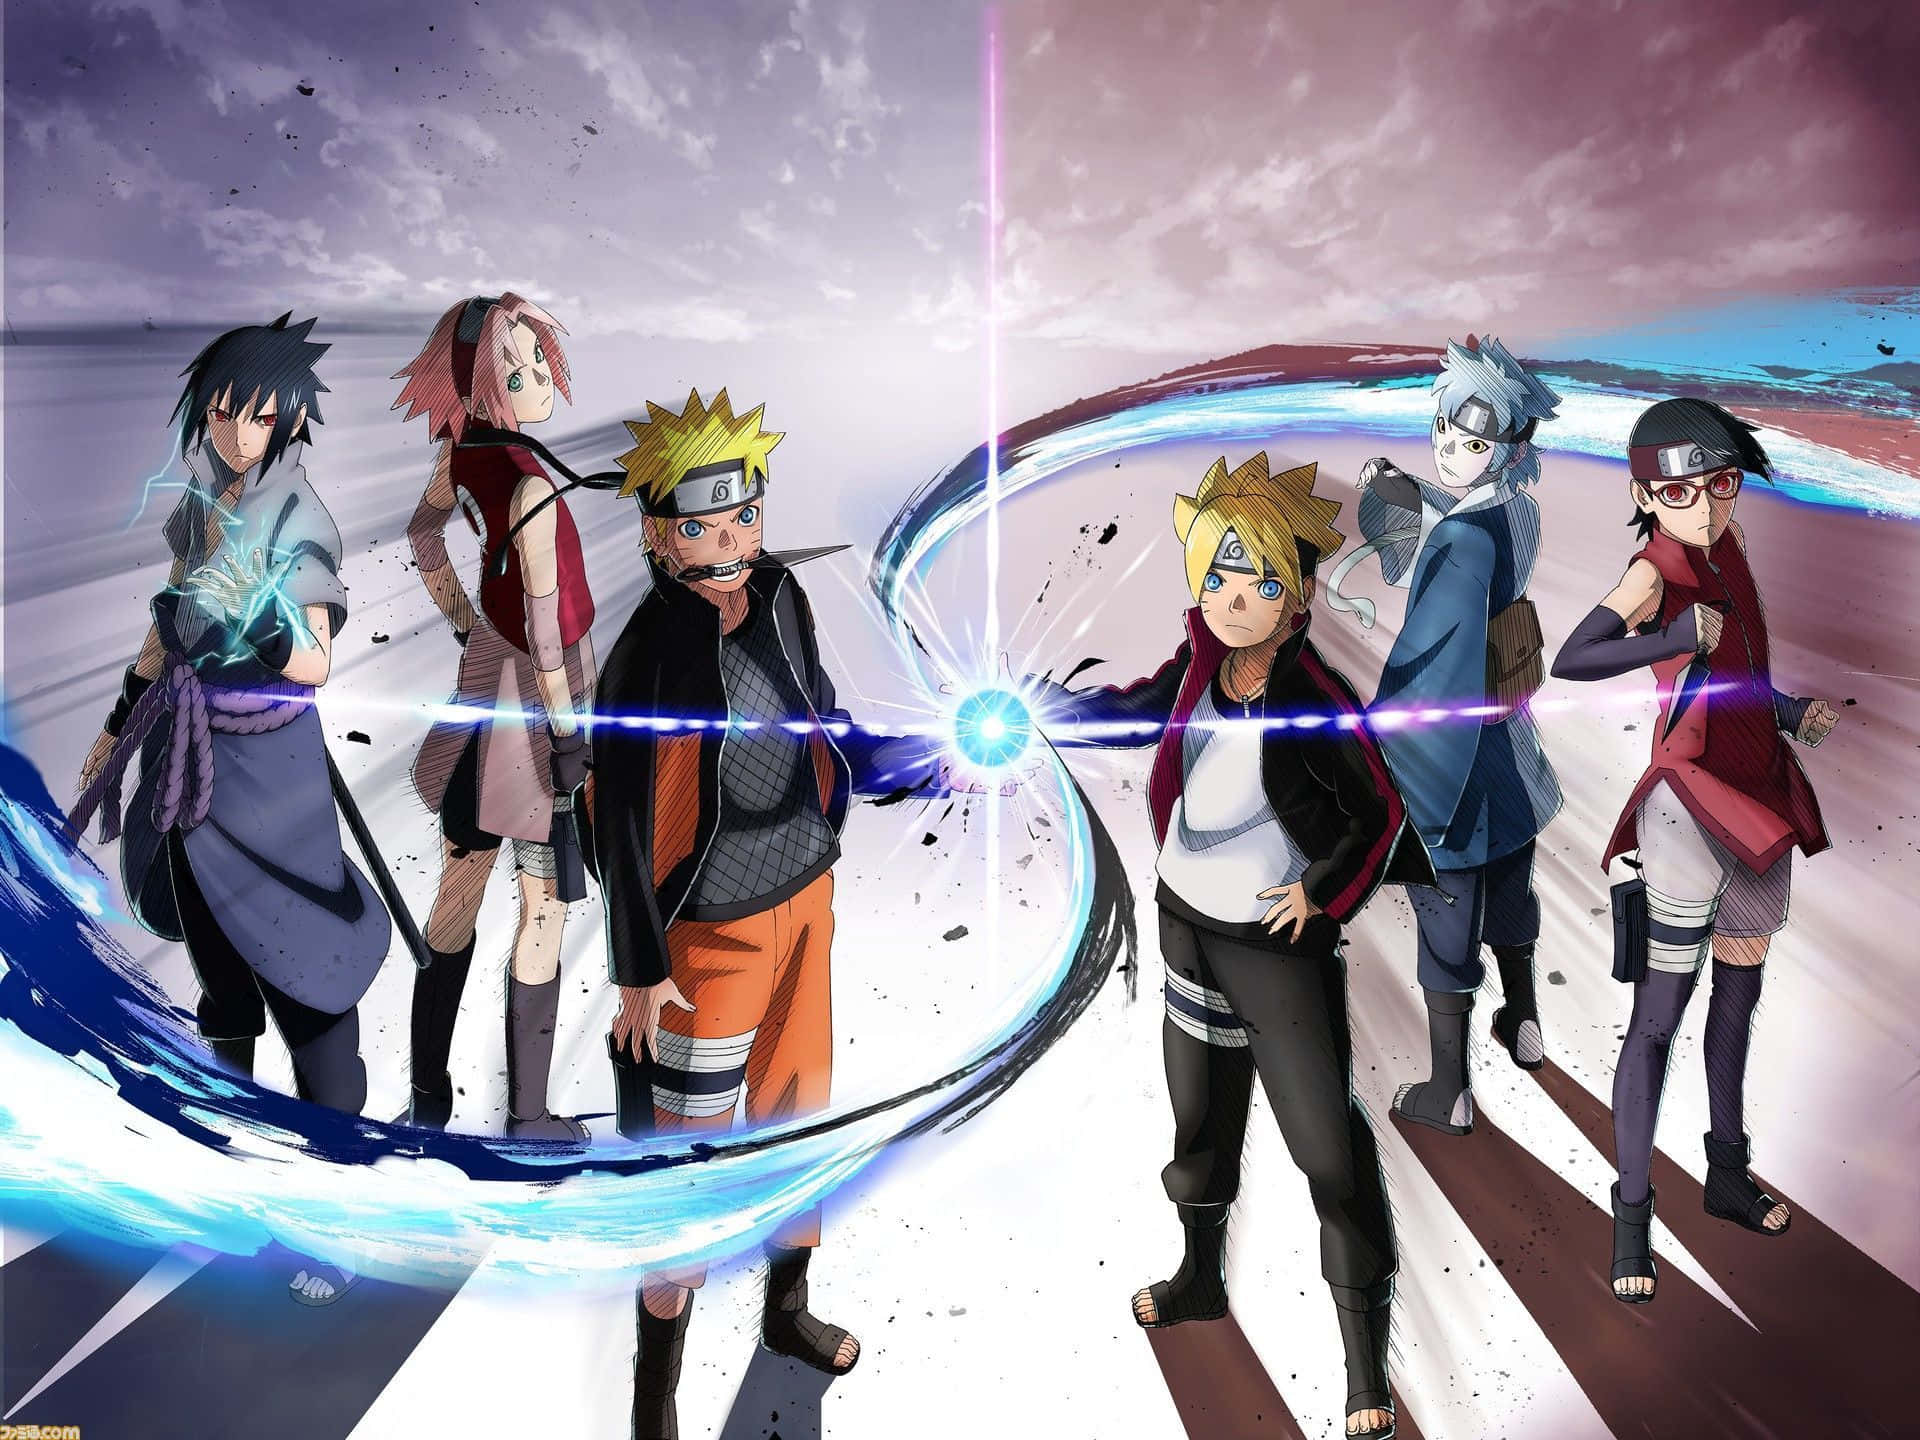 'Leaders of the Naruto Group' Wallpaper